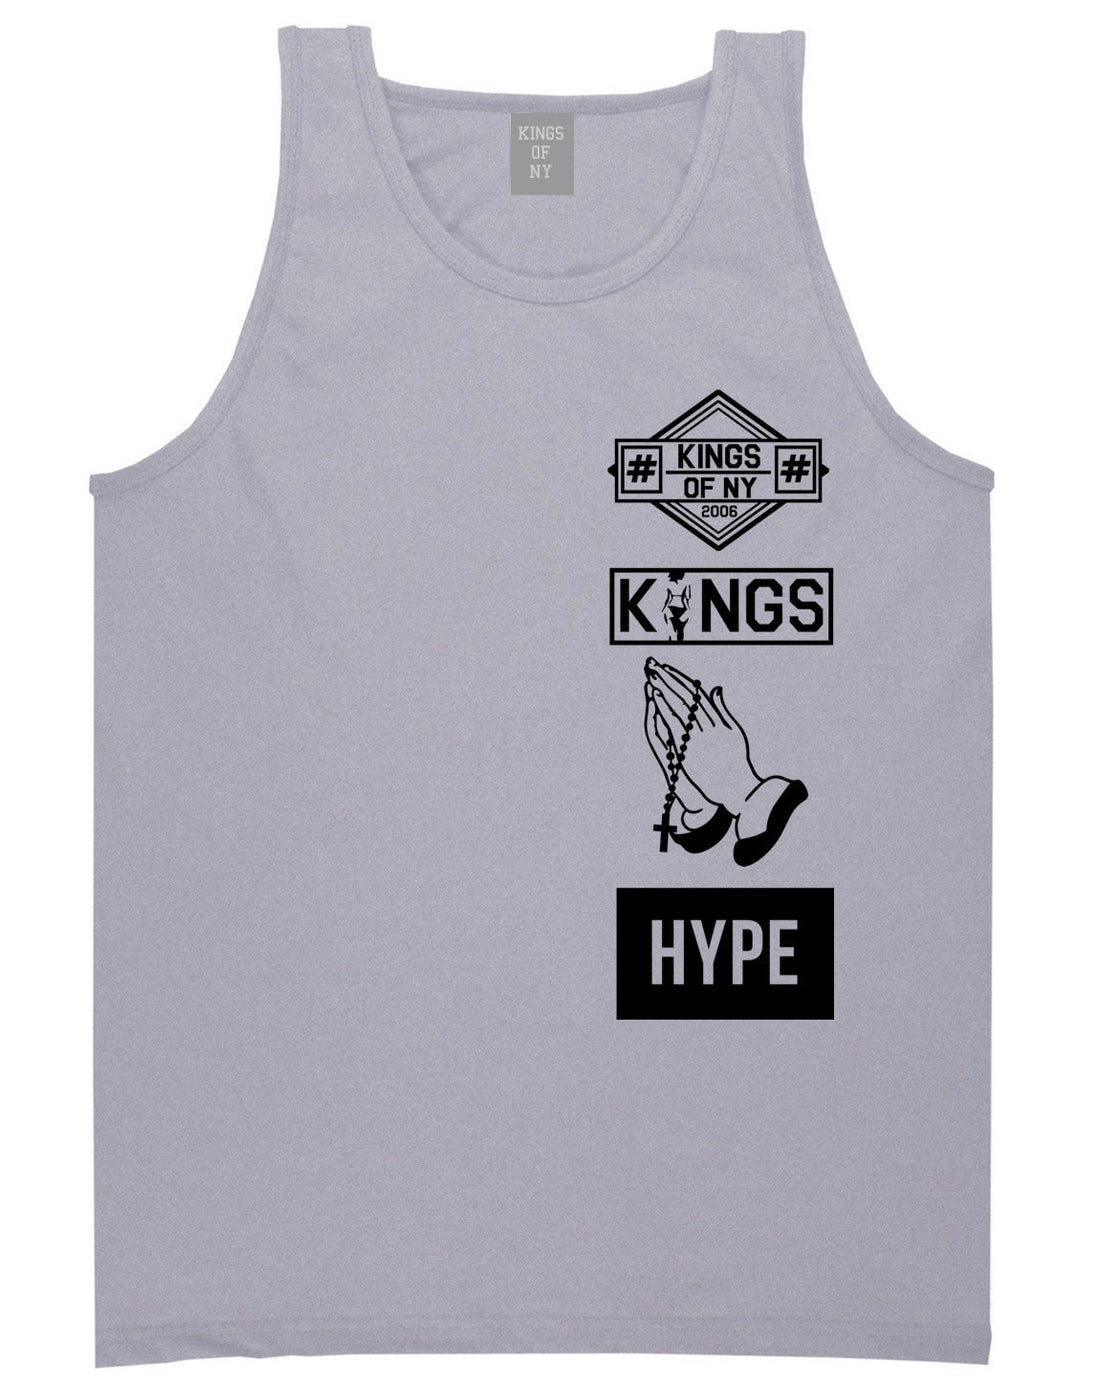 Prayer Hands Hype Left Logos Tank Top in Grey By Kings Of NY